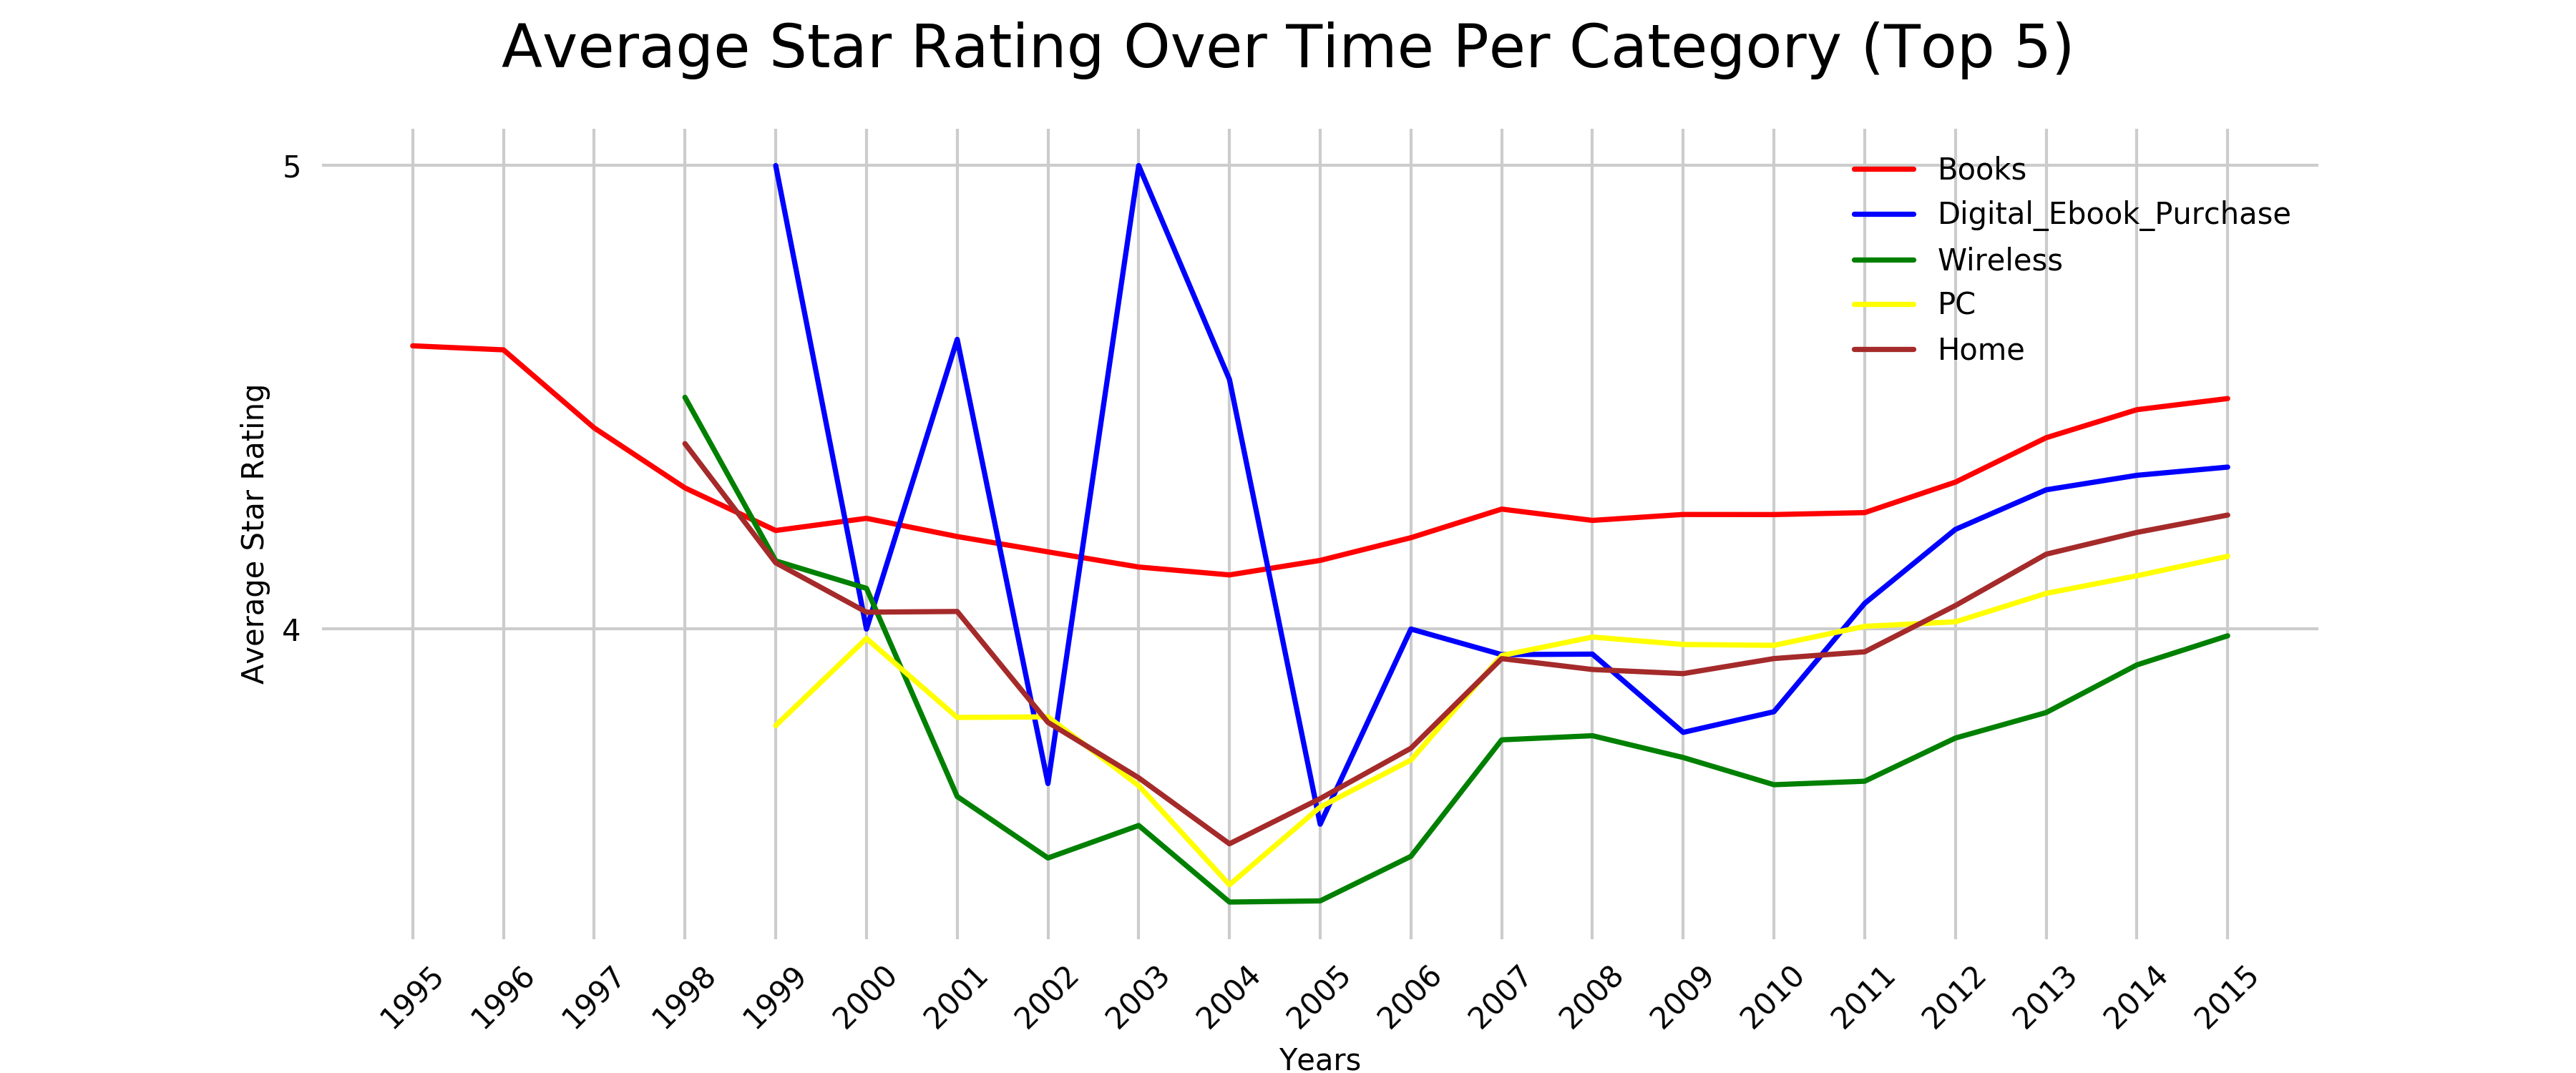 Average Star Rating Over Time Per Category